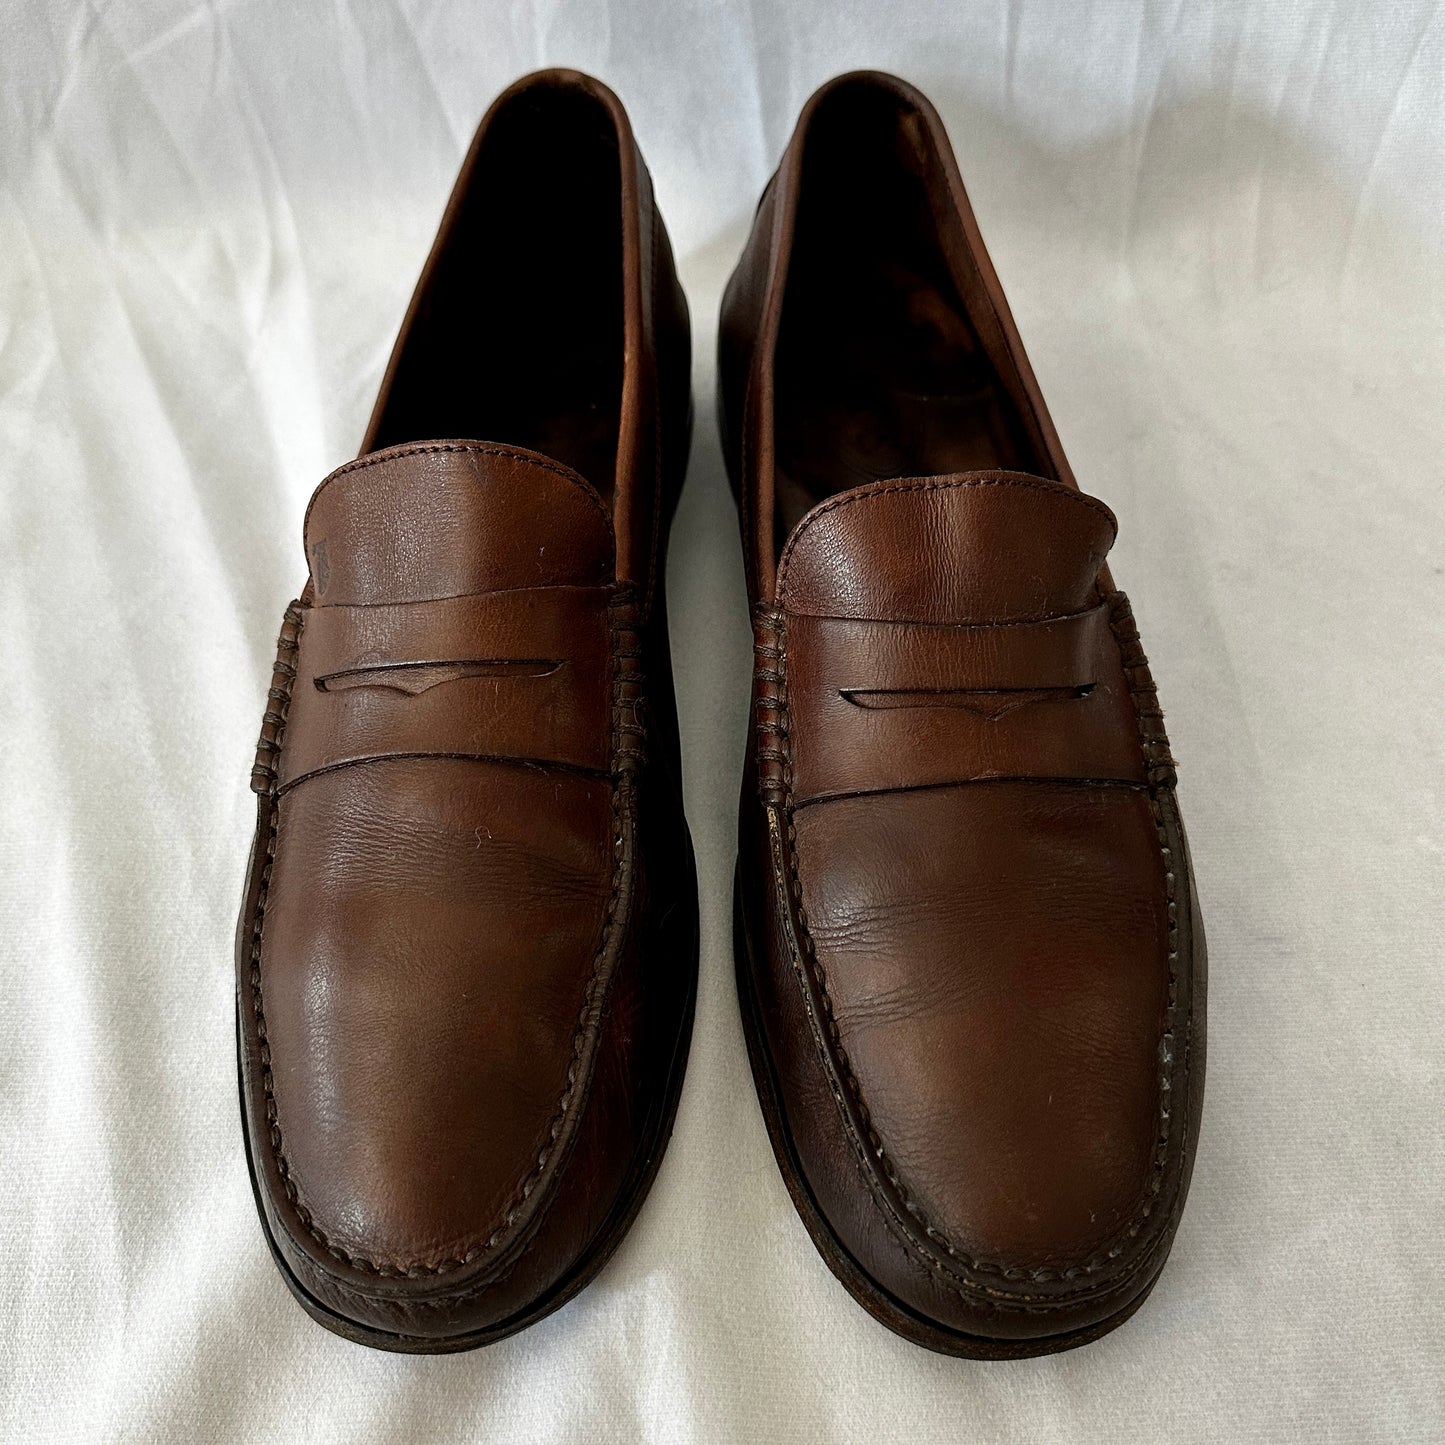 Tod's Loafers Dark Brown Leather 10.5 - Made in Italy